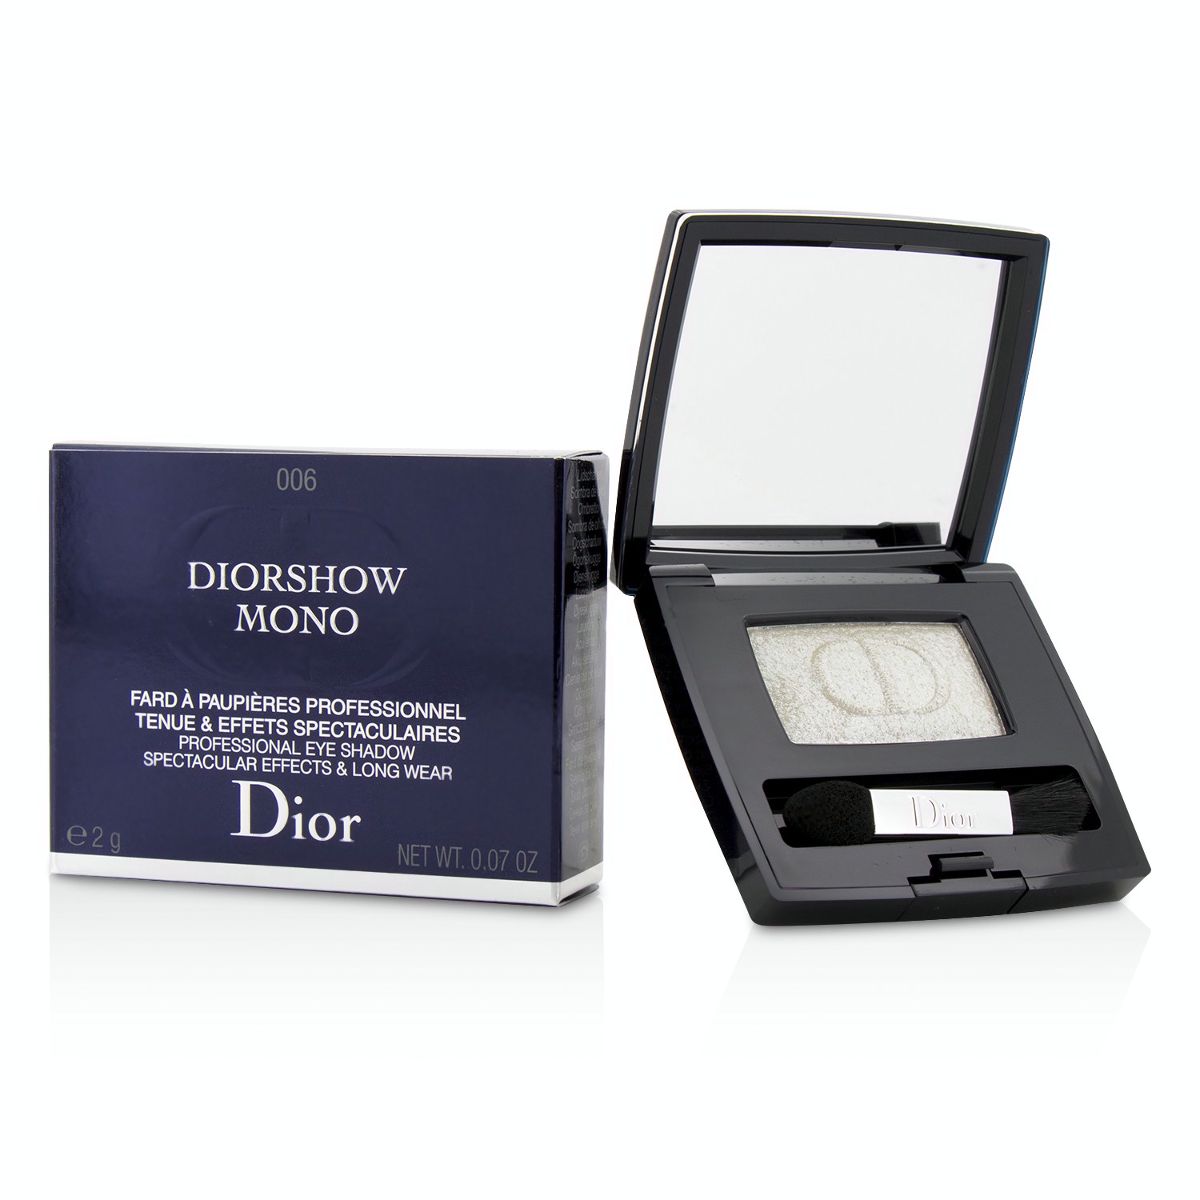 Diorshow Mono Professional Spectacular Effects  Long Wear Eyeshadow - # 006 Infinity Christian Dior Image